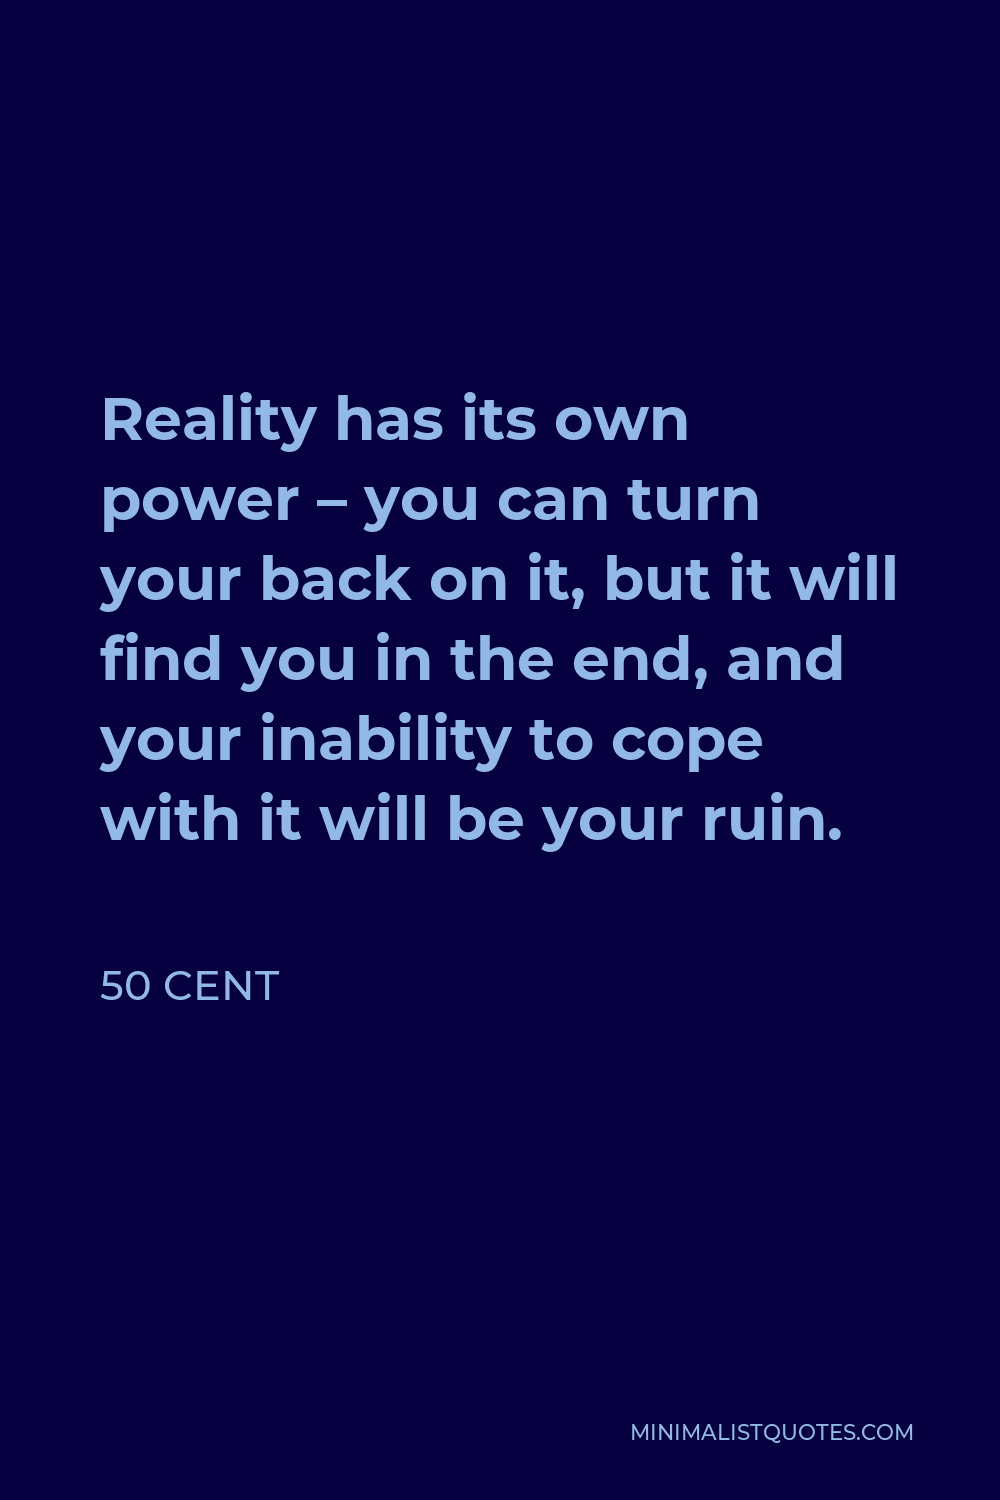 50 Cent Quote - Reality has its own power – you can turn your back on it, but it will find you in the end, and your inability to cope with it will be your ruin.